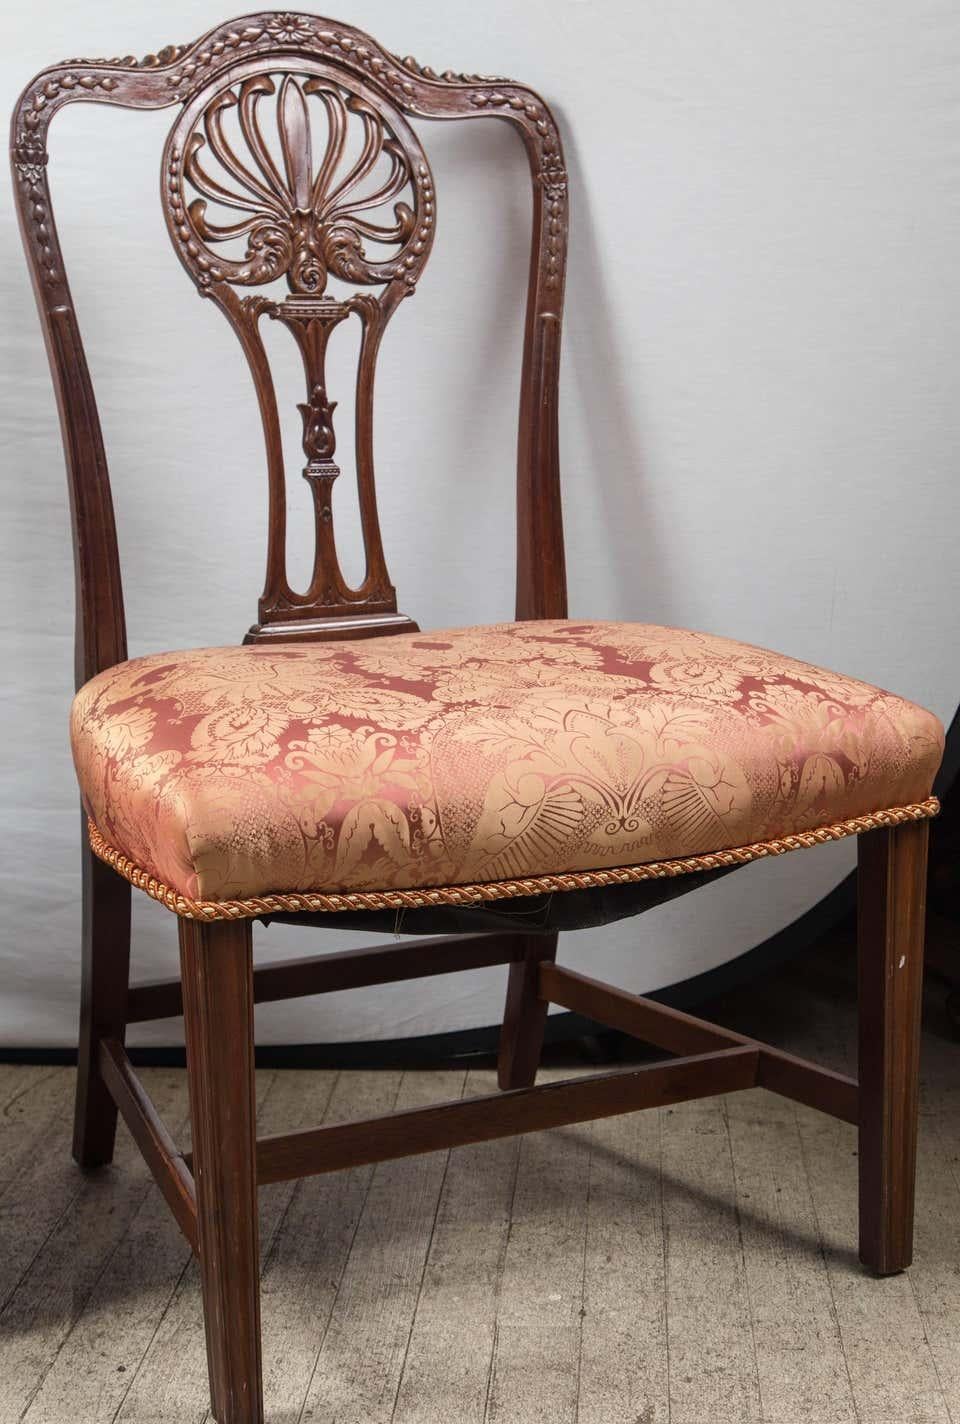 A fine set of 16 hand carved Hepplewhite dining chairs. 2 arms and 14 sides. Wood dowels and covered in a mauve silk.